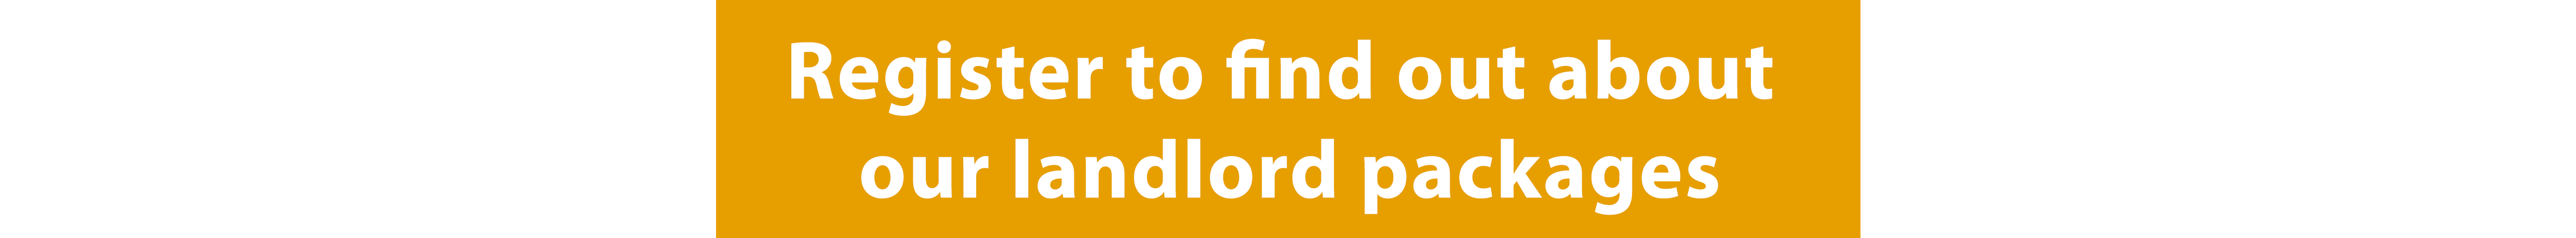 register to find out about our landlord packages